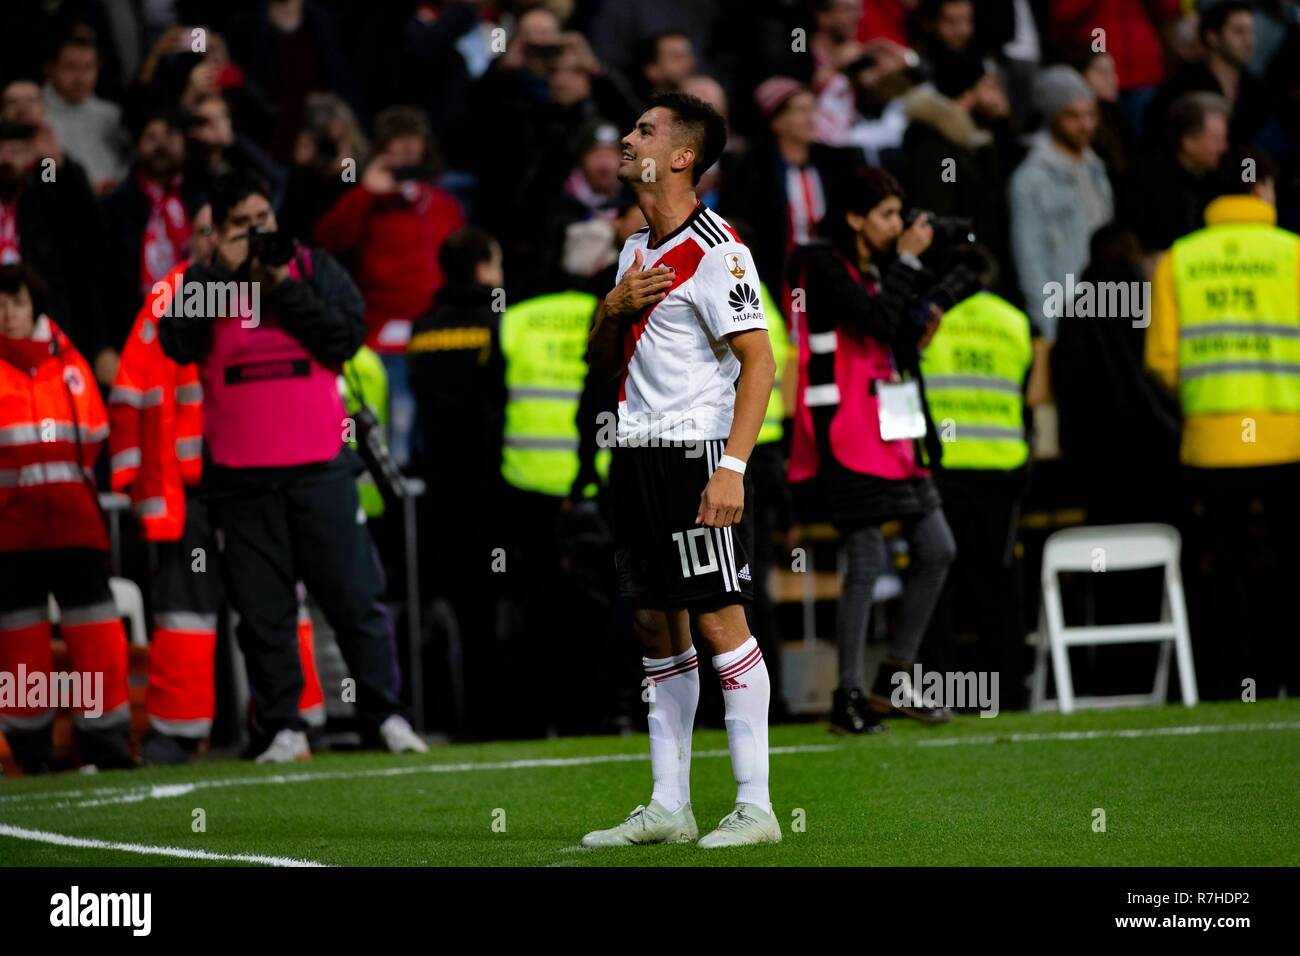 Gonzalo MartÃnez of River Plate celebrates victory during the Copa Libertadores final 2018/19 match between Boca Juniors and River Plate, at Santiago Bernabeu Stadium in Madrid on December 9, 2018. (Photo by Guille Martinez/Cordon Press)  Cordon Press Stock Photo